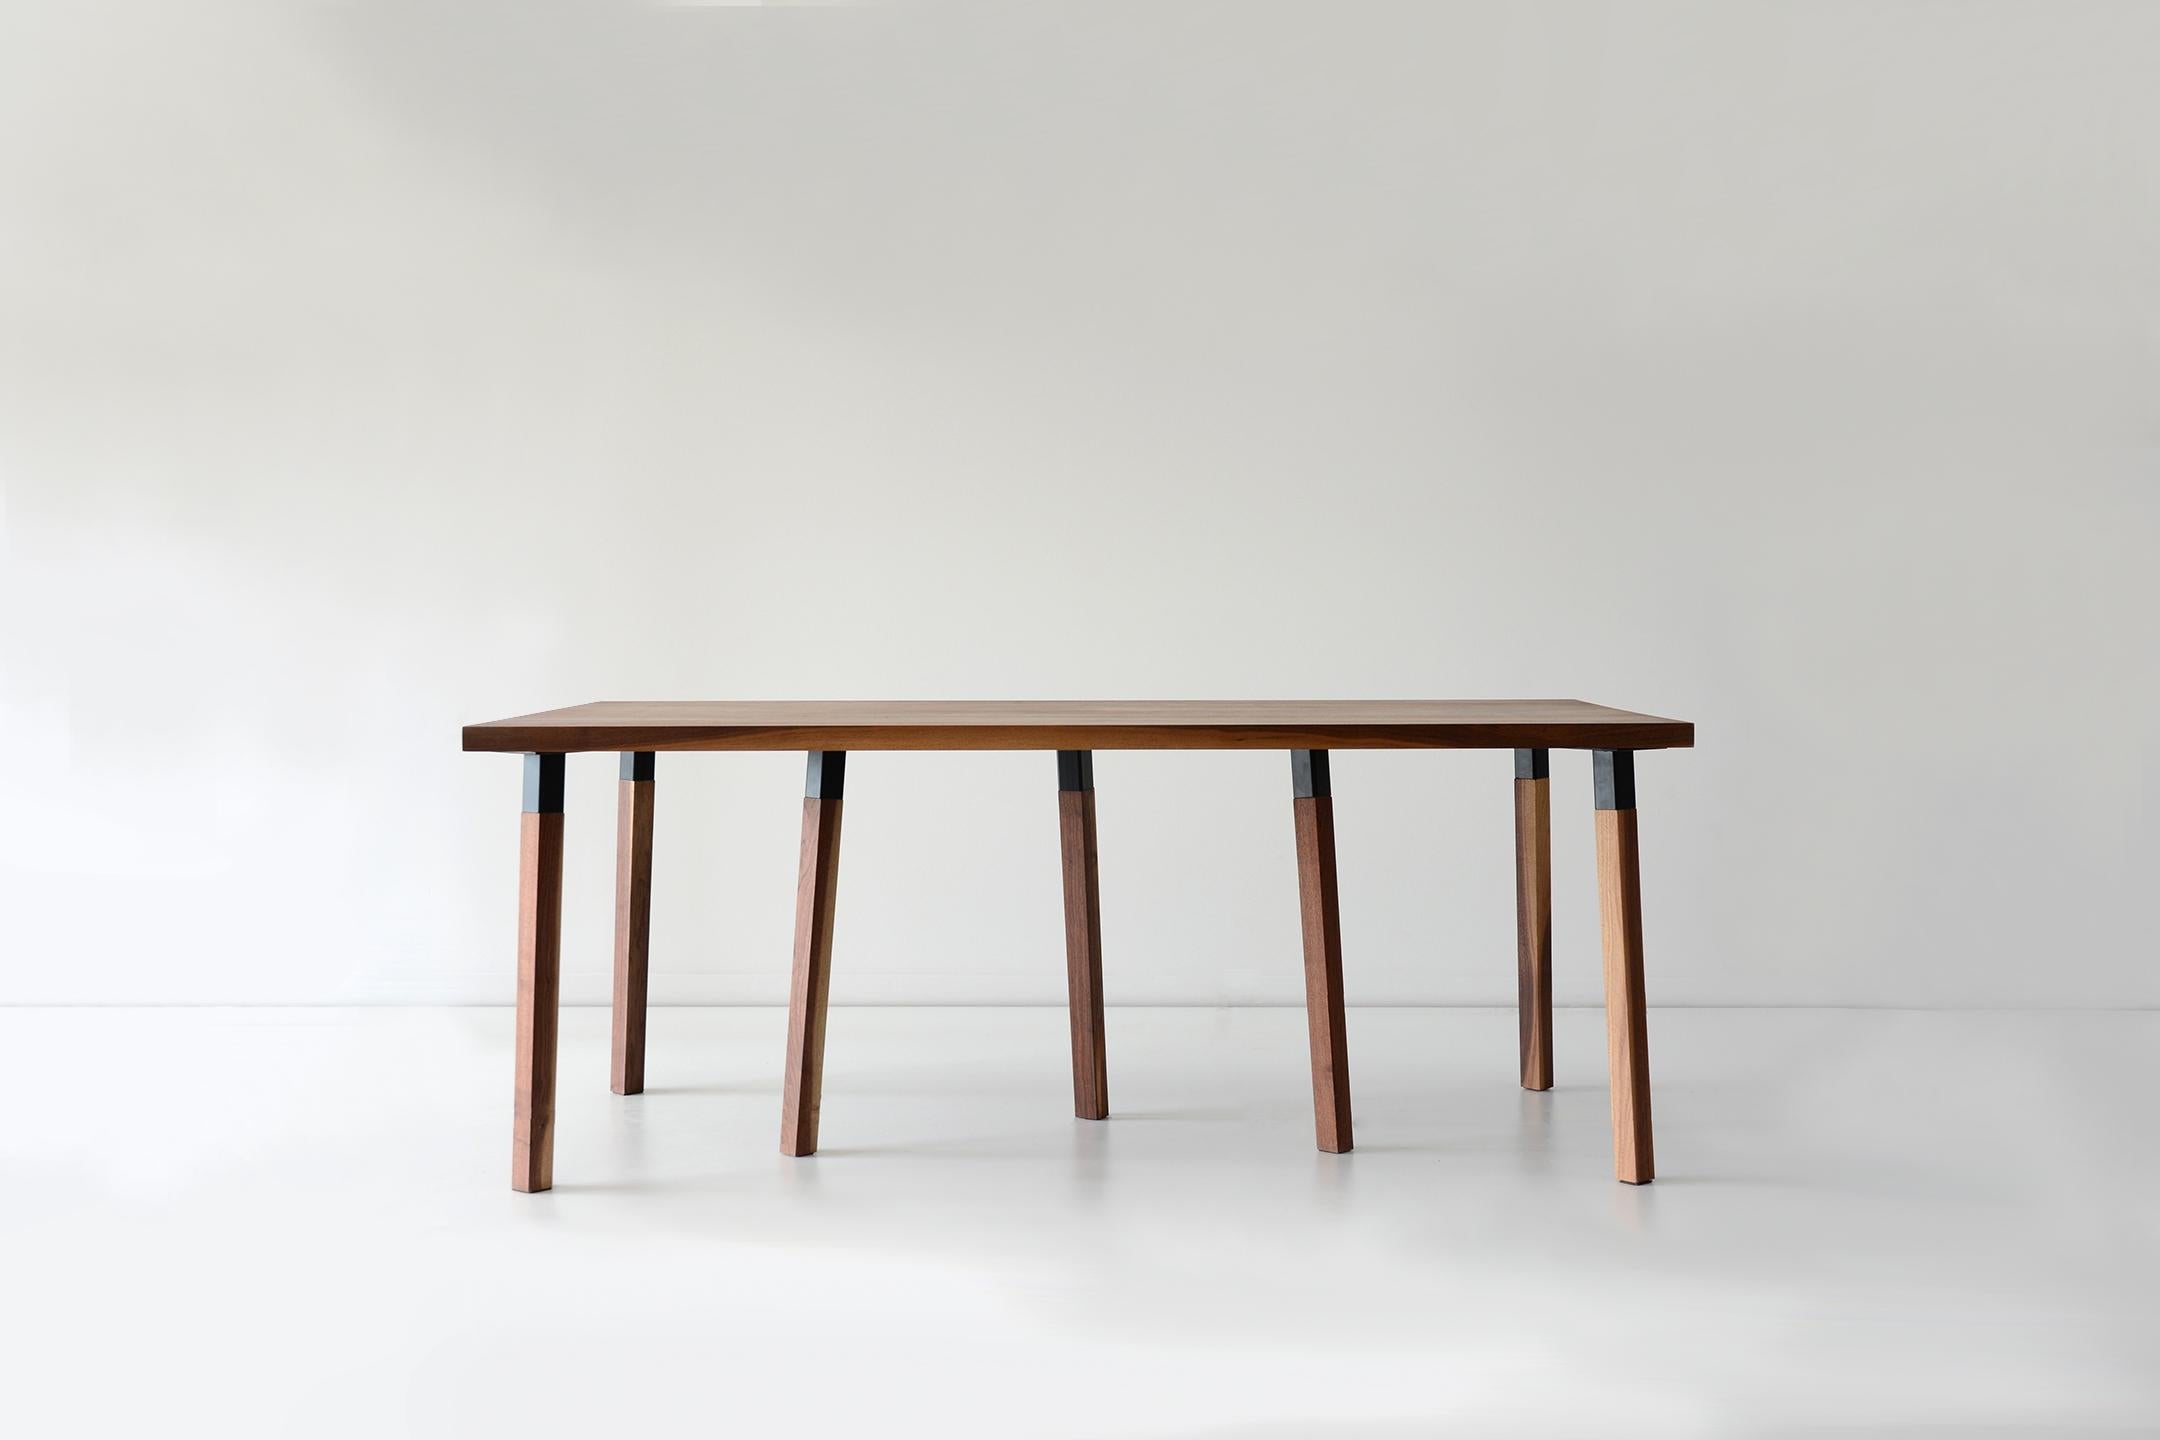 Oak small pier dining table by Hollis & Morris
Dimensions: 84